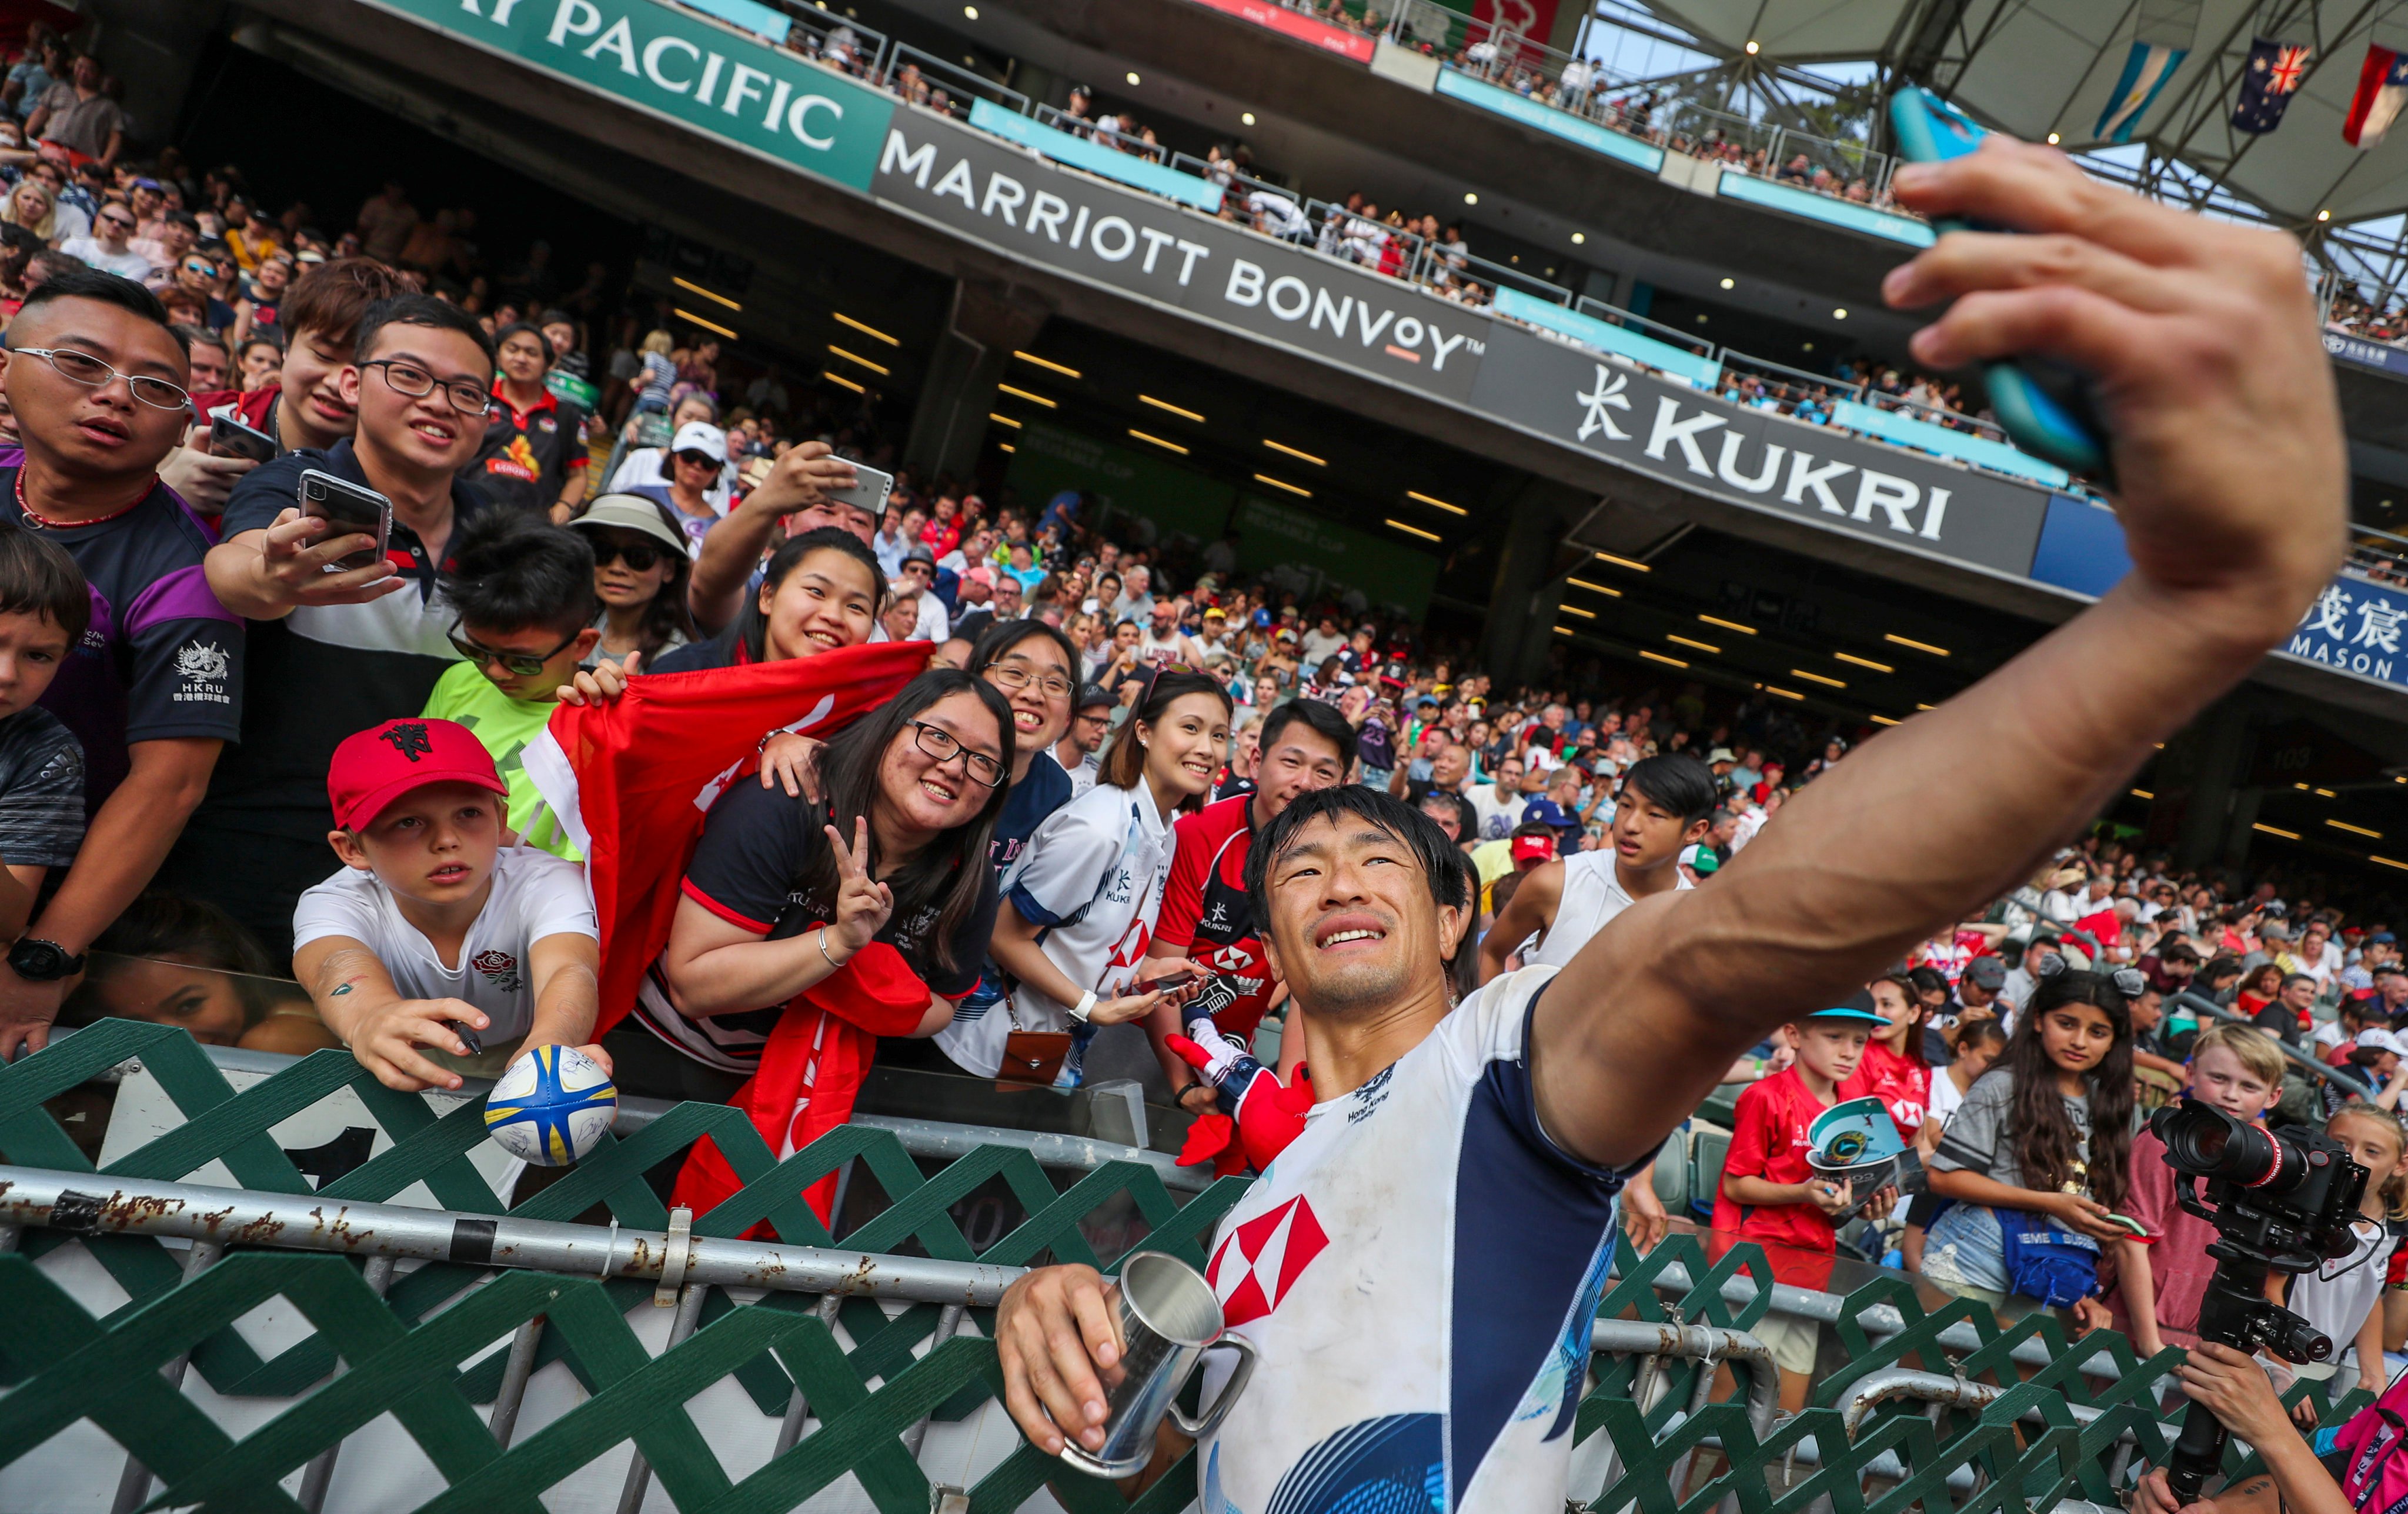 Salom Yiu Kam-shing of Hong Kong takes a selfie with fans after the men’s qualifier final against Ireland on the last day of the Hong Kong Sevens at Hong Kong Stadium on April 7, 2019. The event has been suspended for two years because of the pandemic. Photo: Sam Tsang